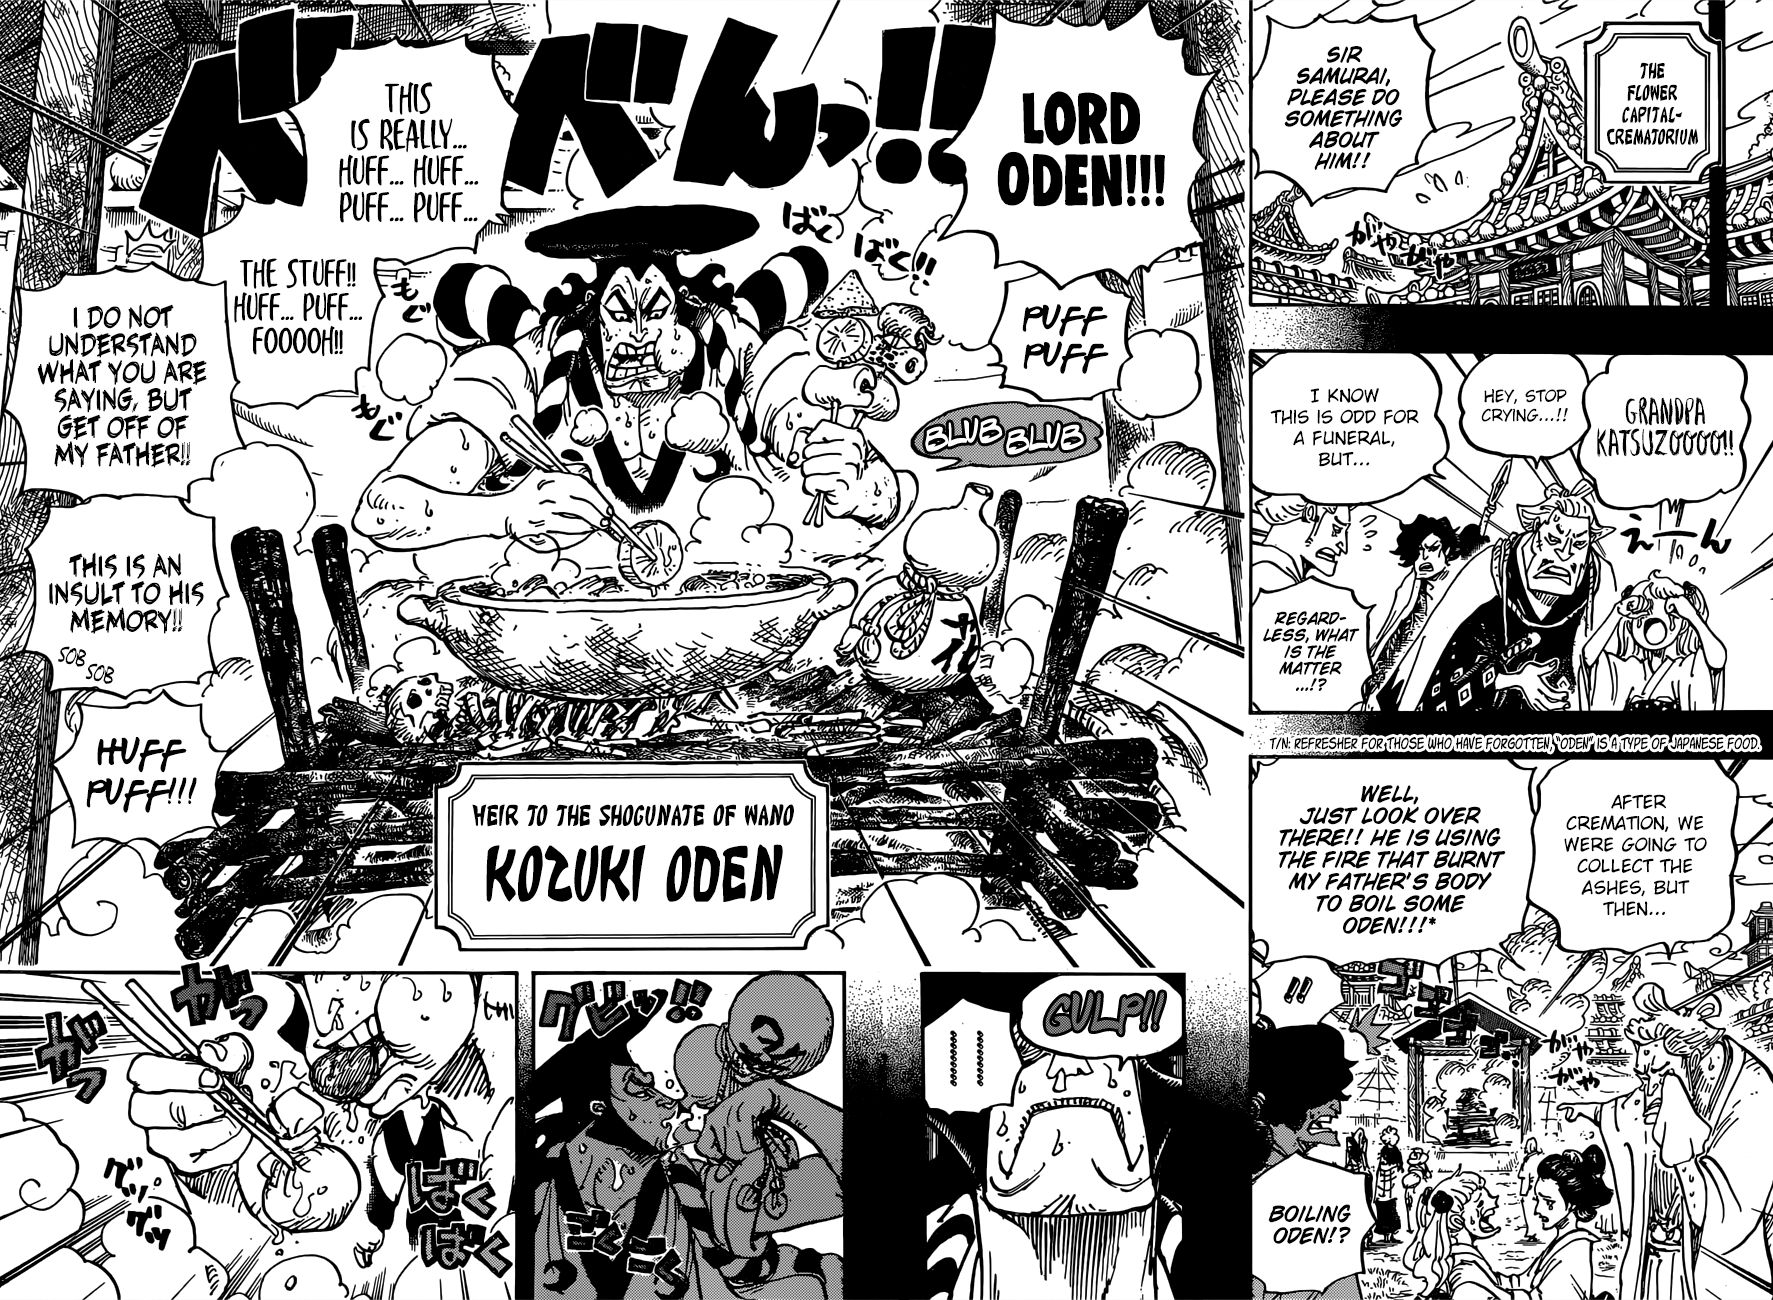 One Piece, Chapter 960 - Kozuki Oden Takes the Stage image 13